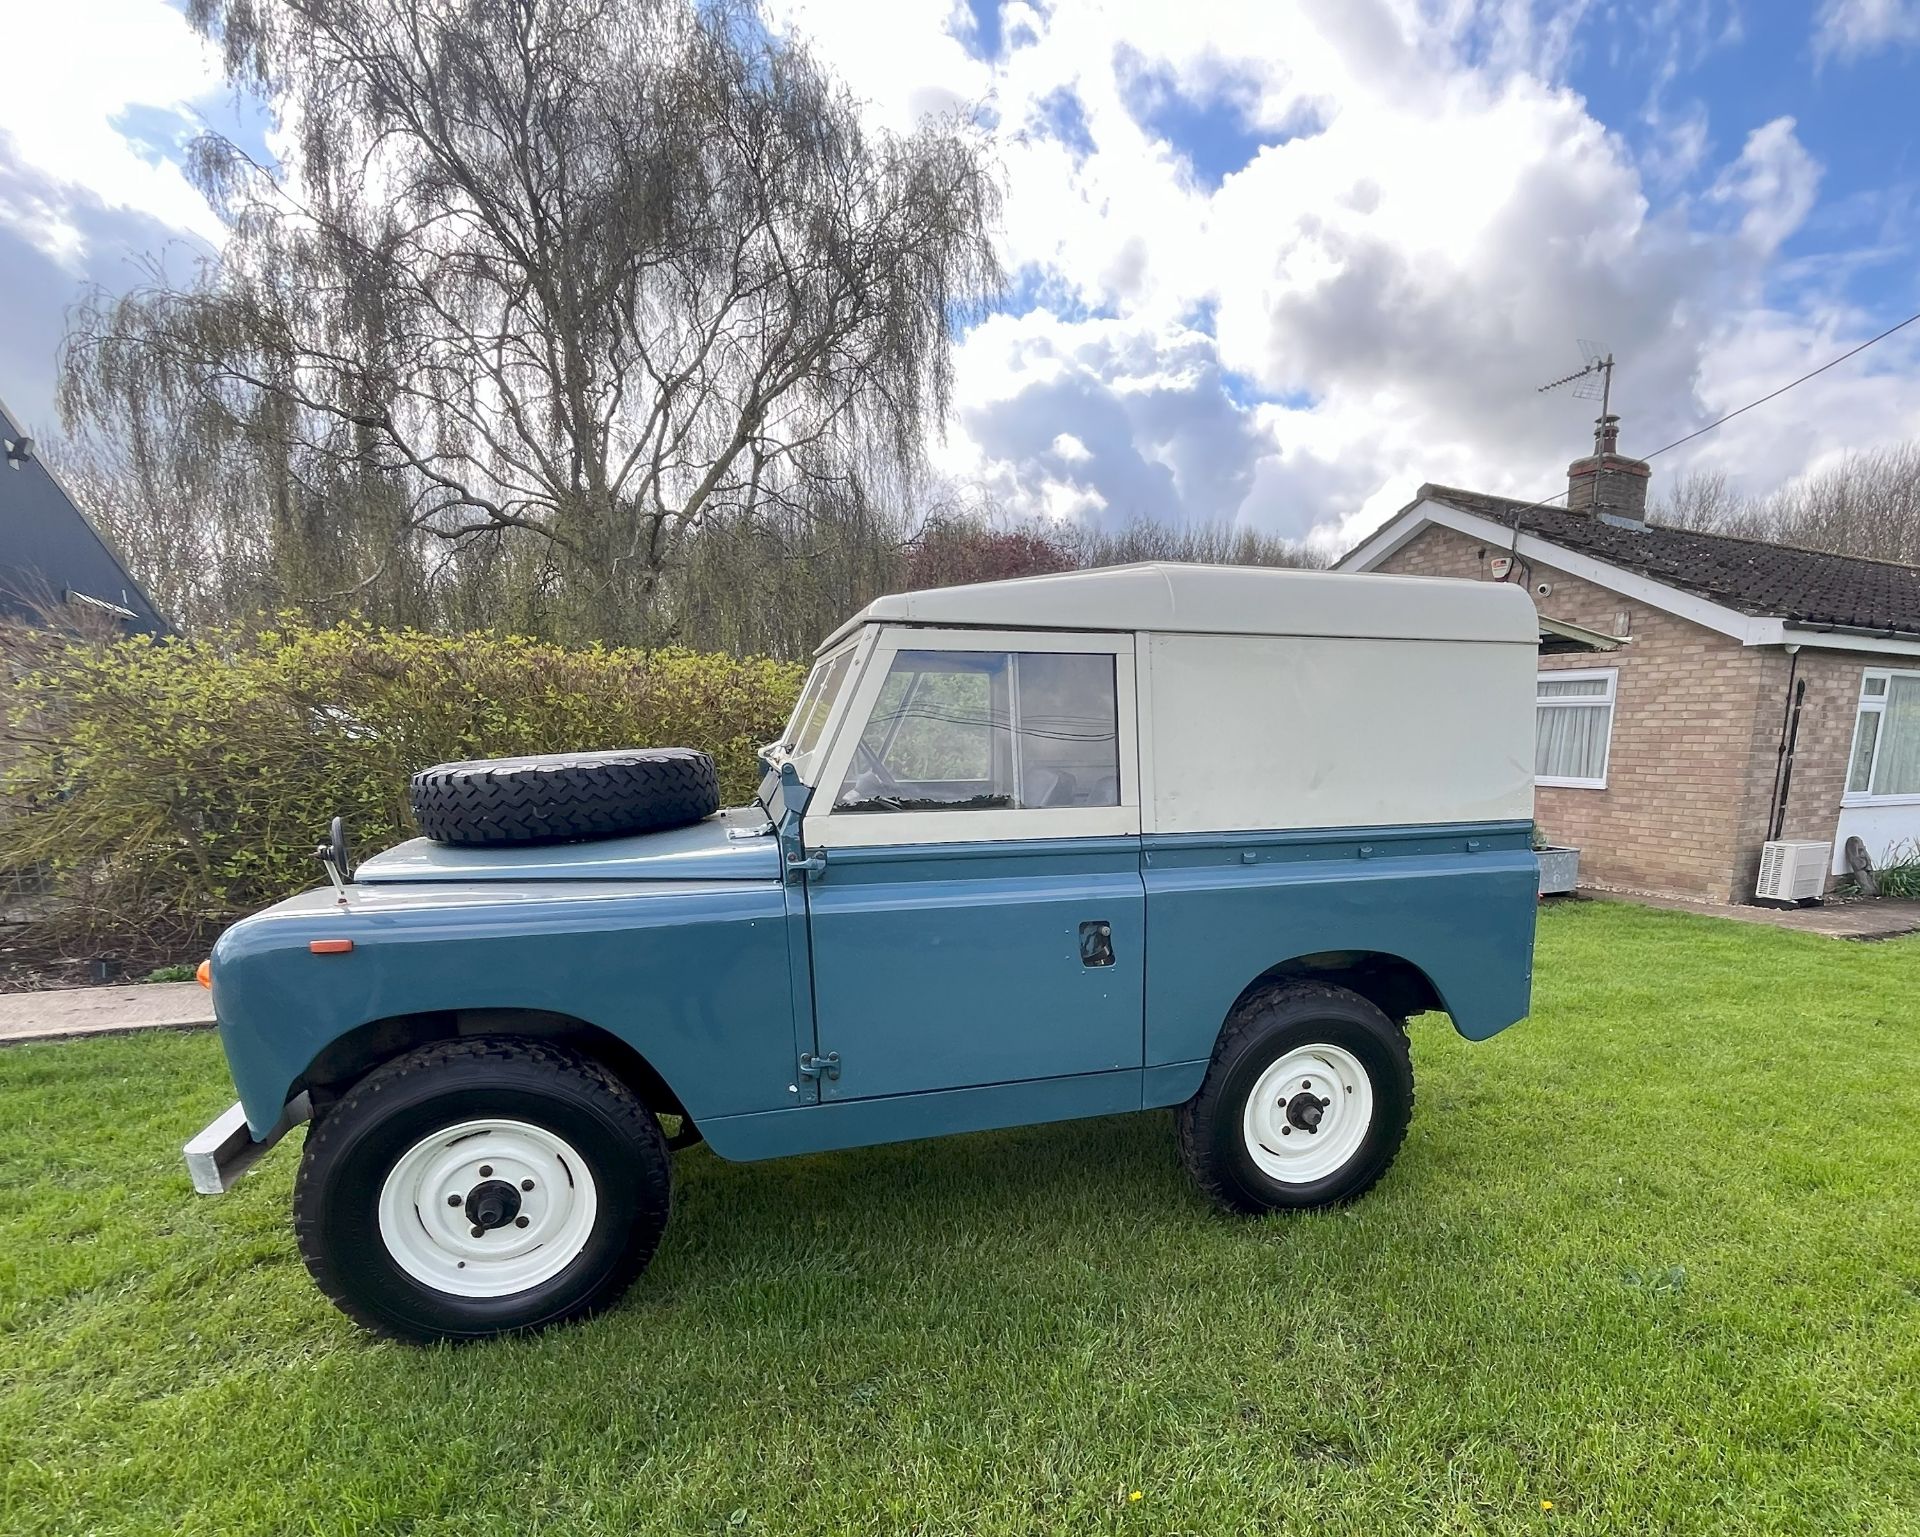 1962 Land Rover 88 Series II, petrol 2.25 litre engine, blue with 64,078 showing on the milometer, - Image 12 of 14